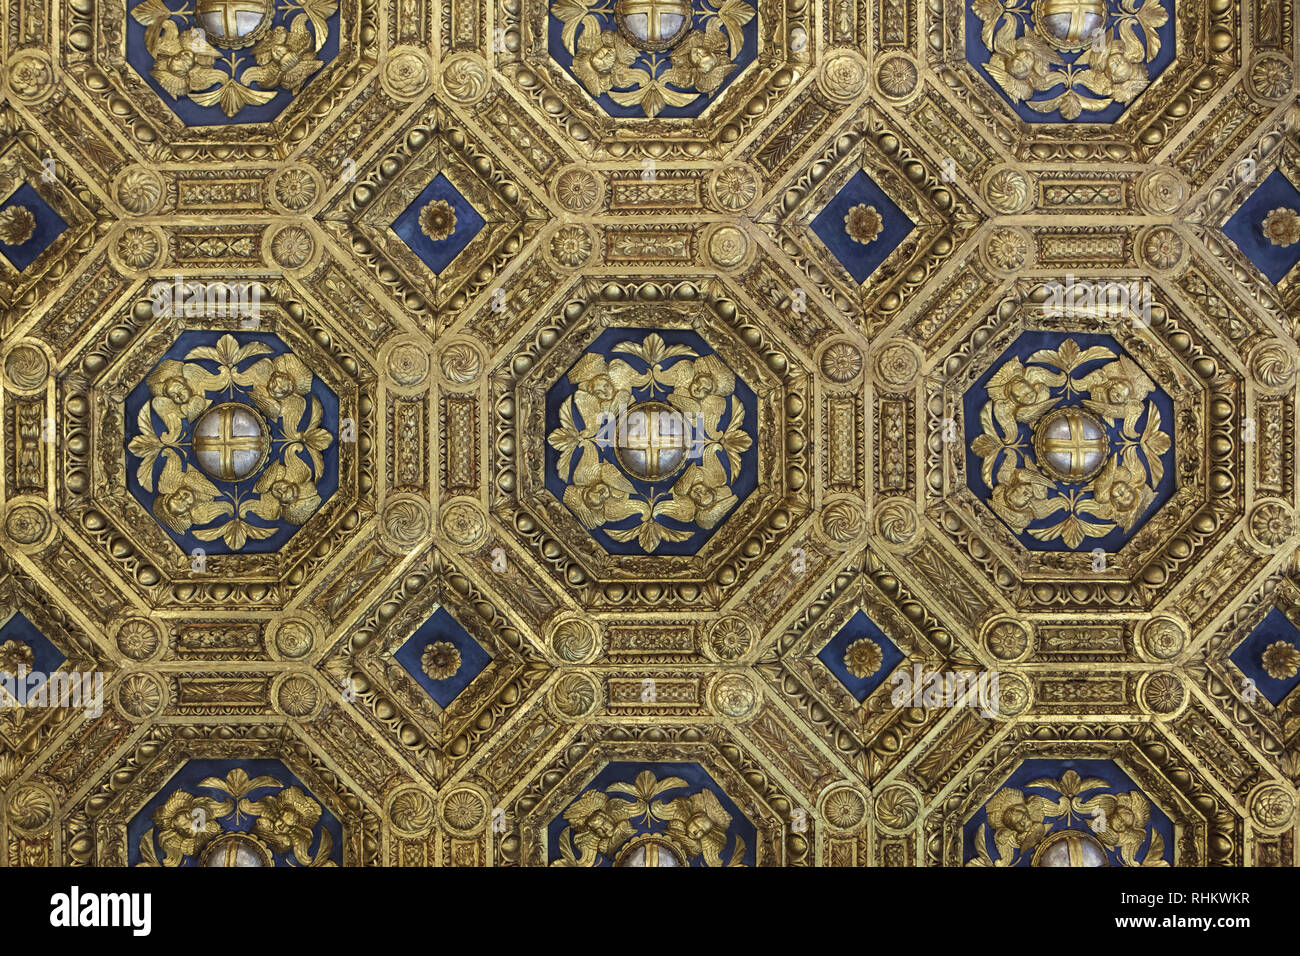 Gilded coffered ceiling designed by Italian Renaissance architect Giuliano da Maiano and assistants (1472-1475) in the Audience Chamber (Sala delle Udienze) of the Apartments of the Priori (Sale dei Priori) in the Palazzo Vecchio in Florence, Tuscany, Italy. Stock Photo